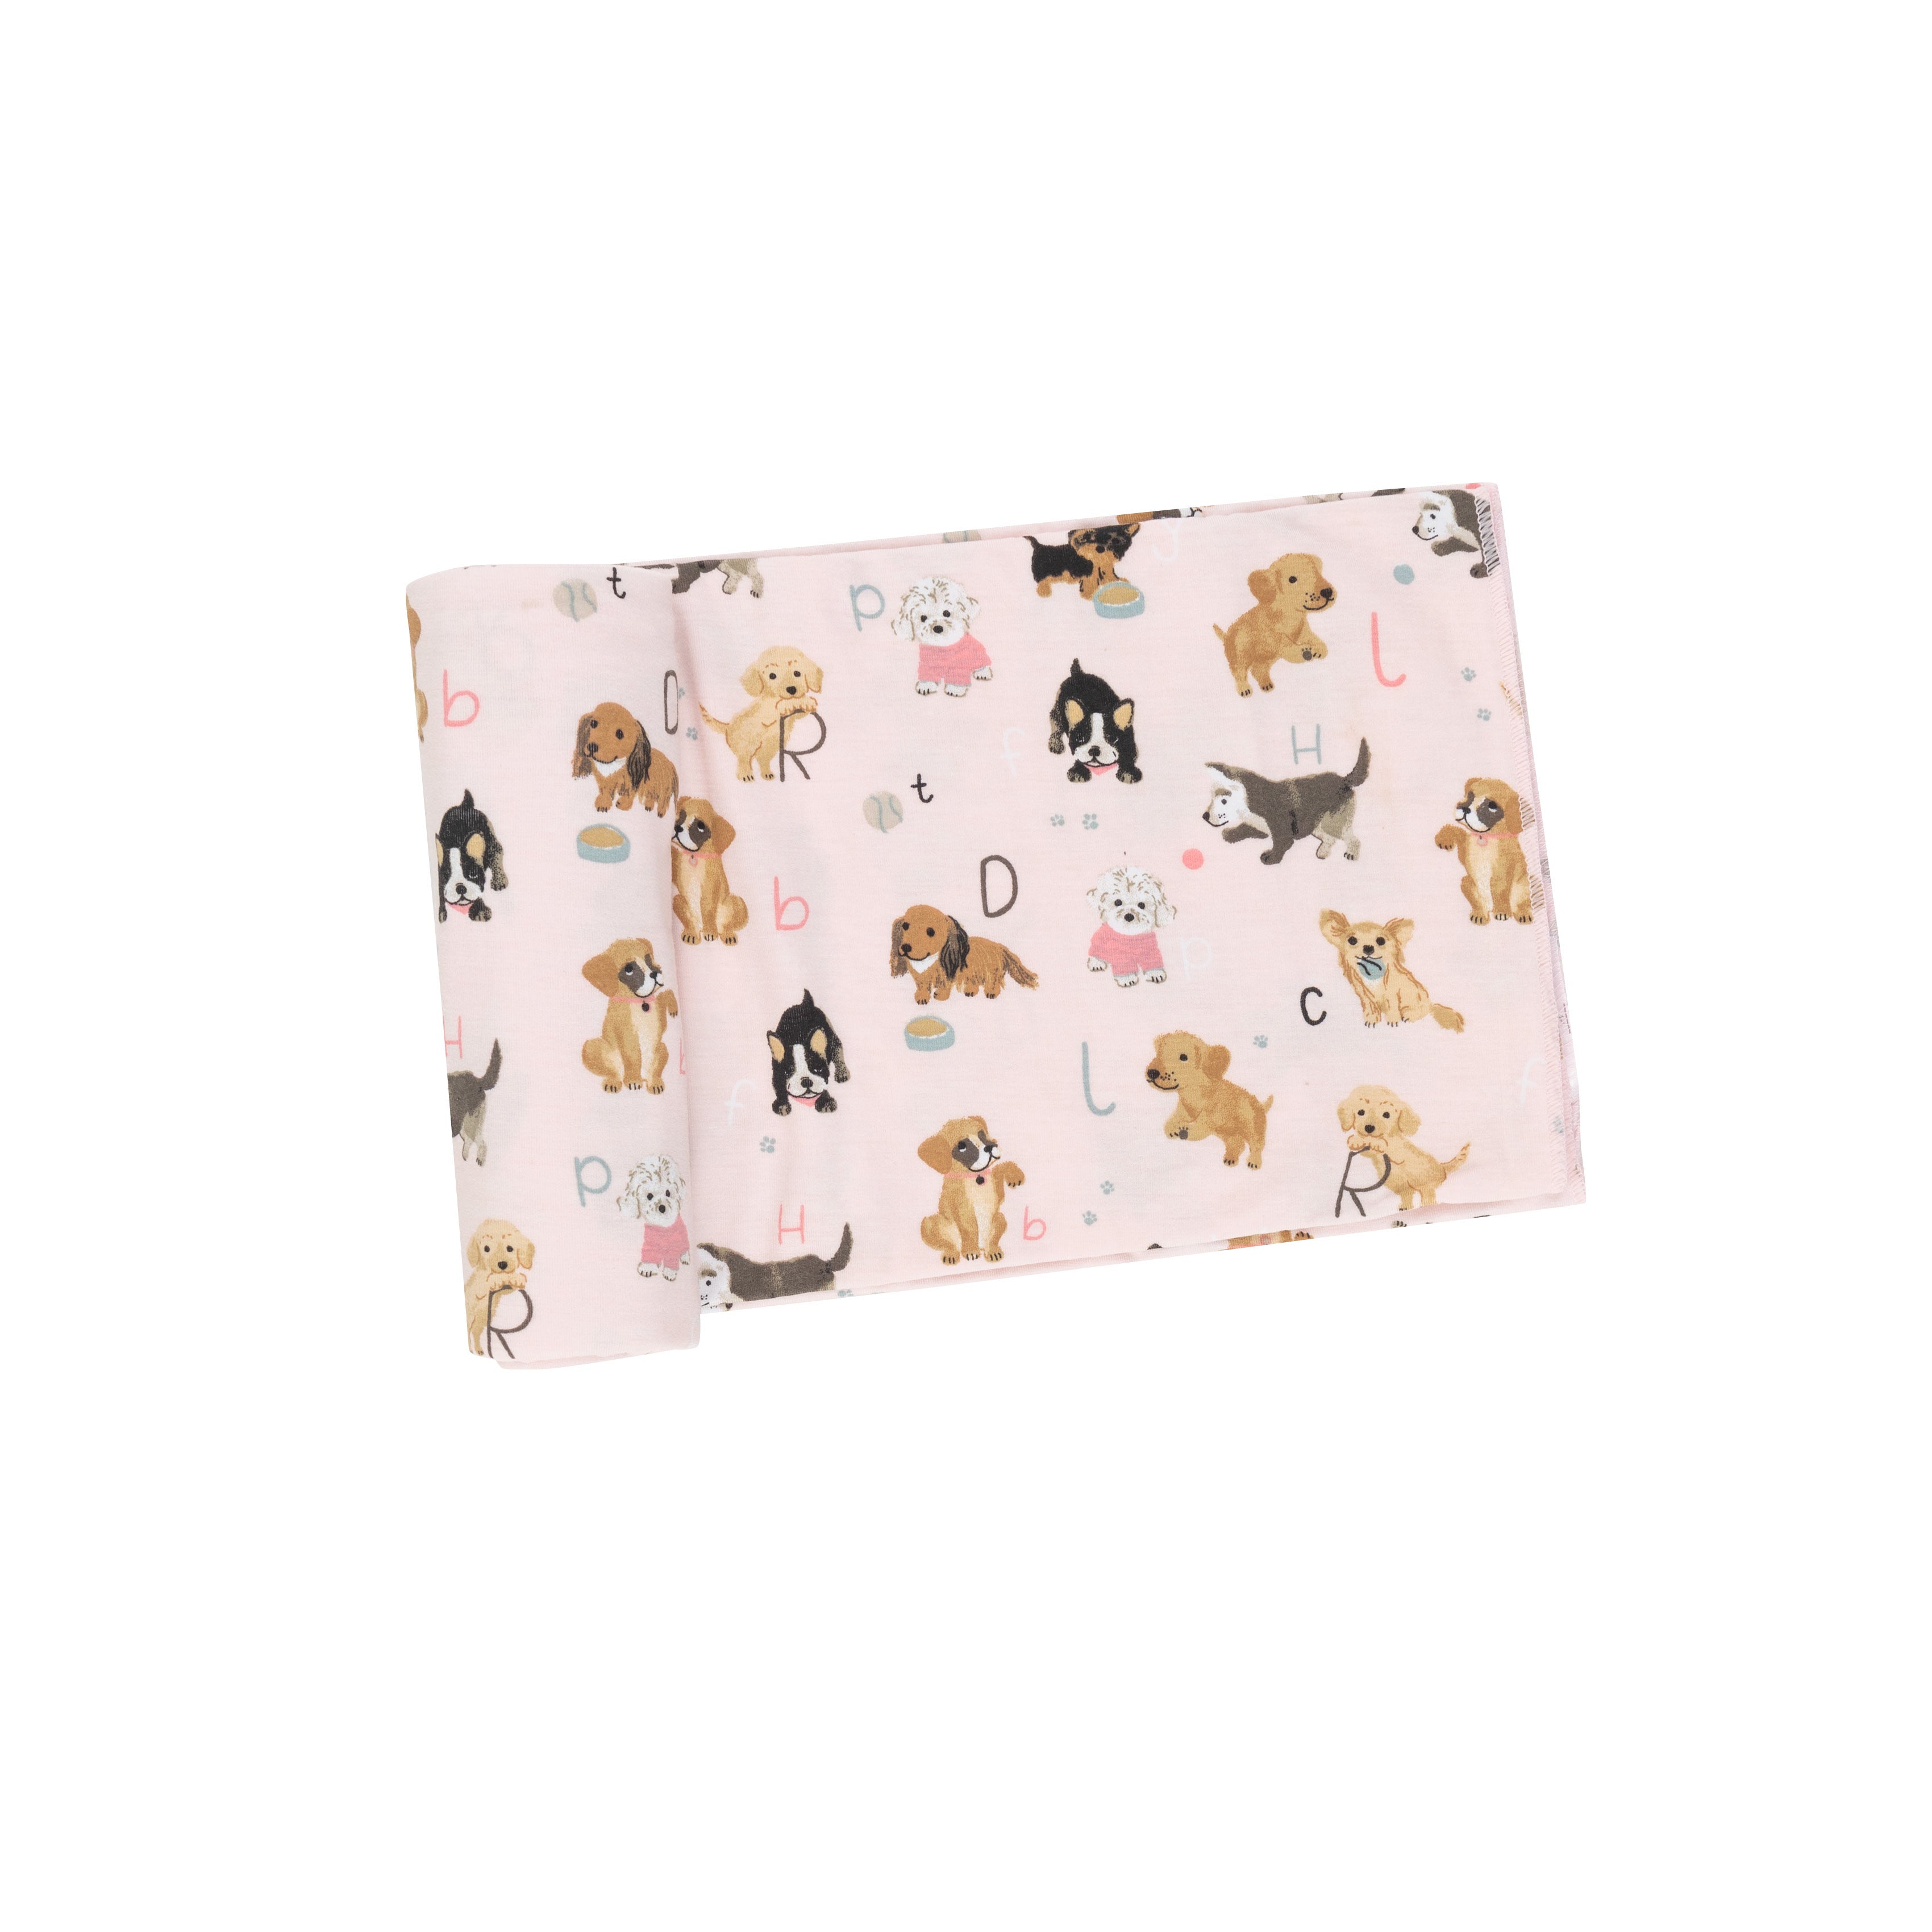 Bamboo Swaddle Blanket - Puppy Alphabet Pink